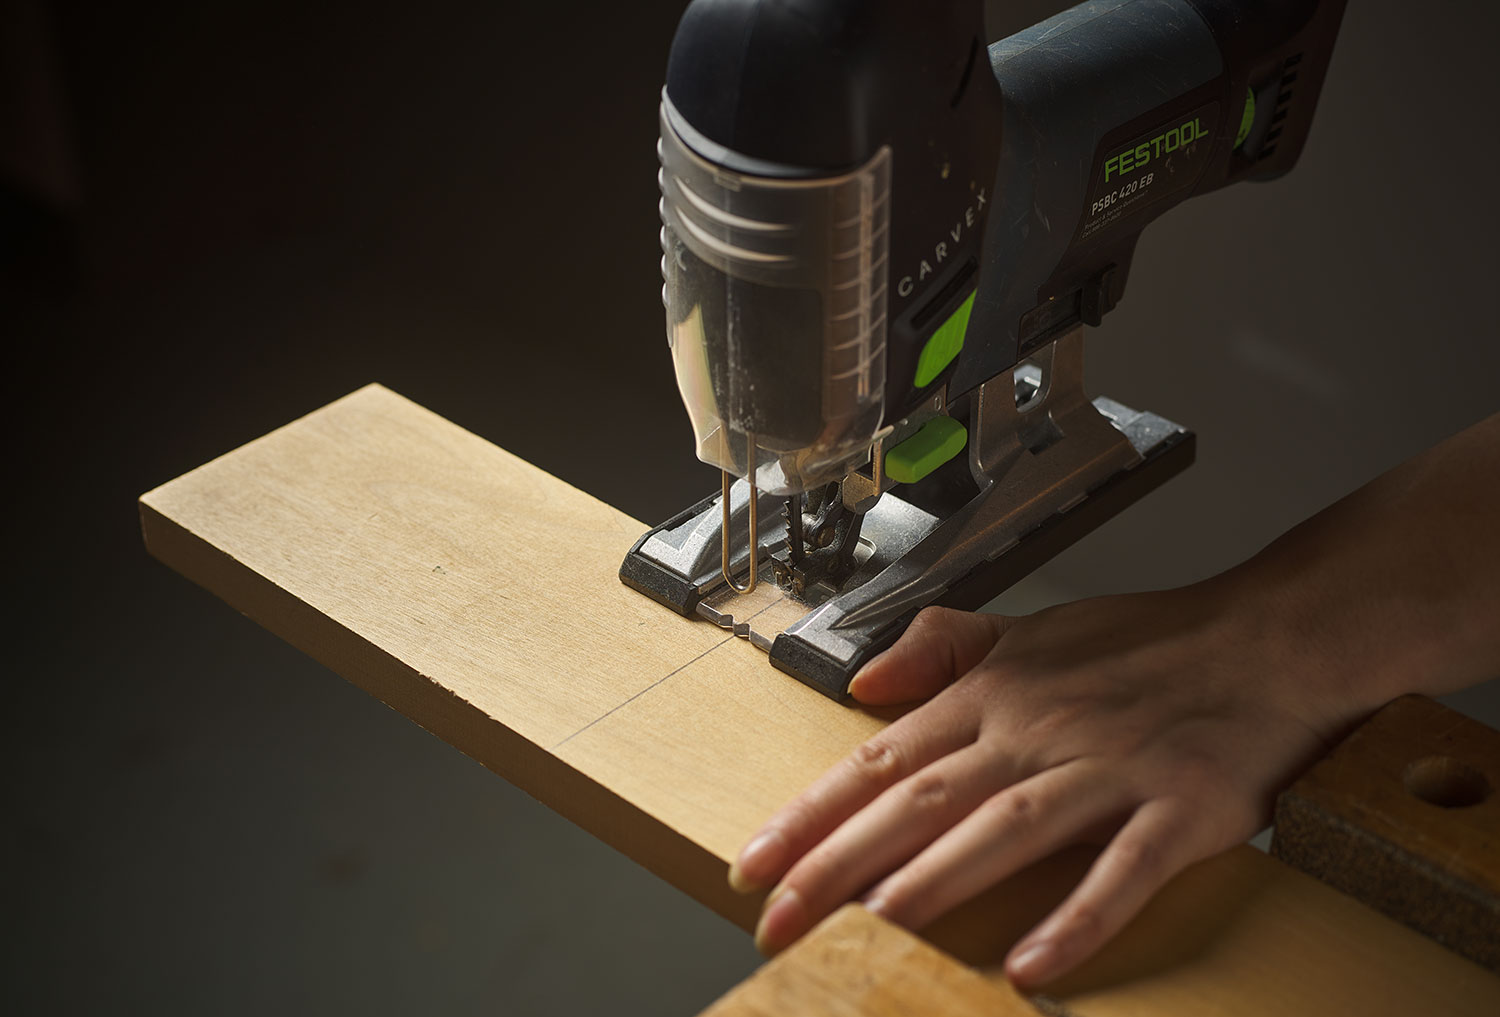 Using a thumb to guide the base plate of the saw